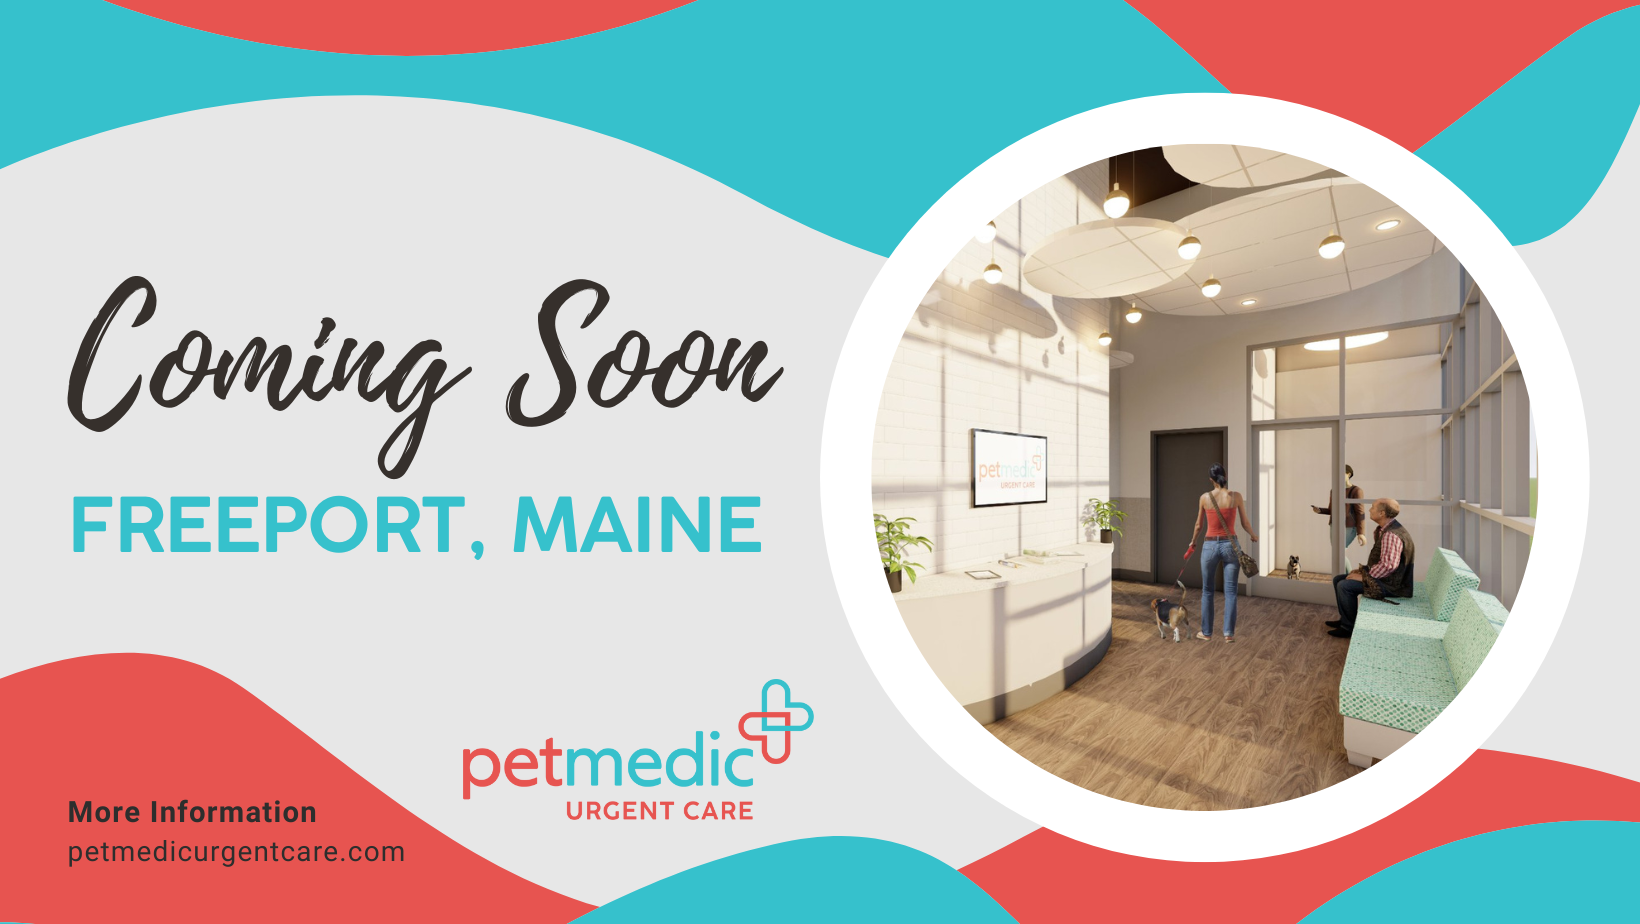 PetMedic Urgent Care Vet Clinic to Open Second Maine Location | Newswire